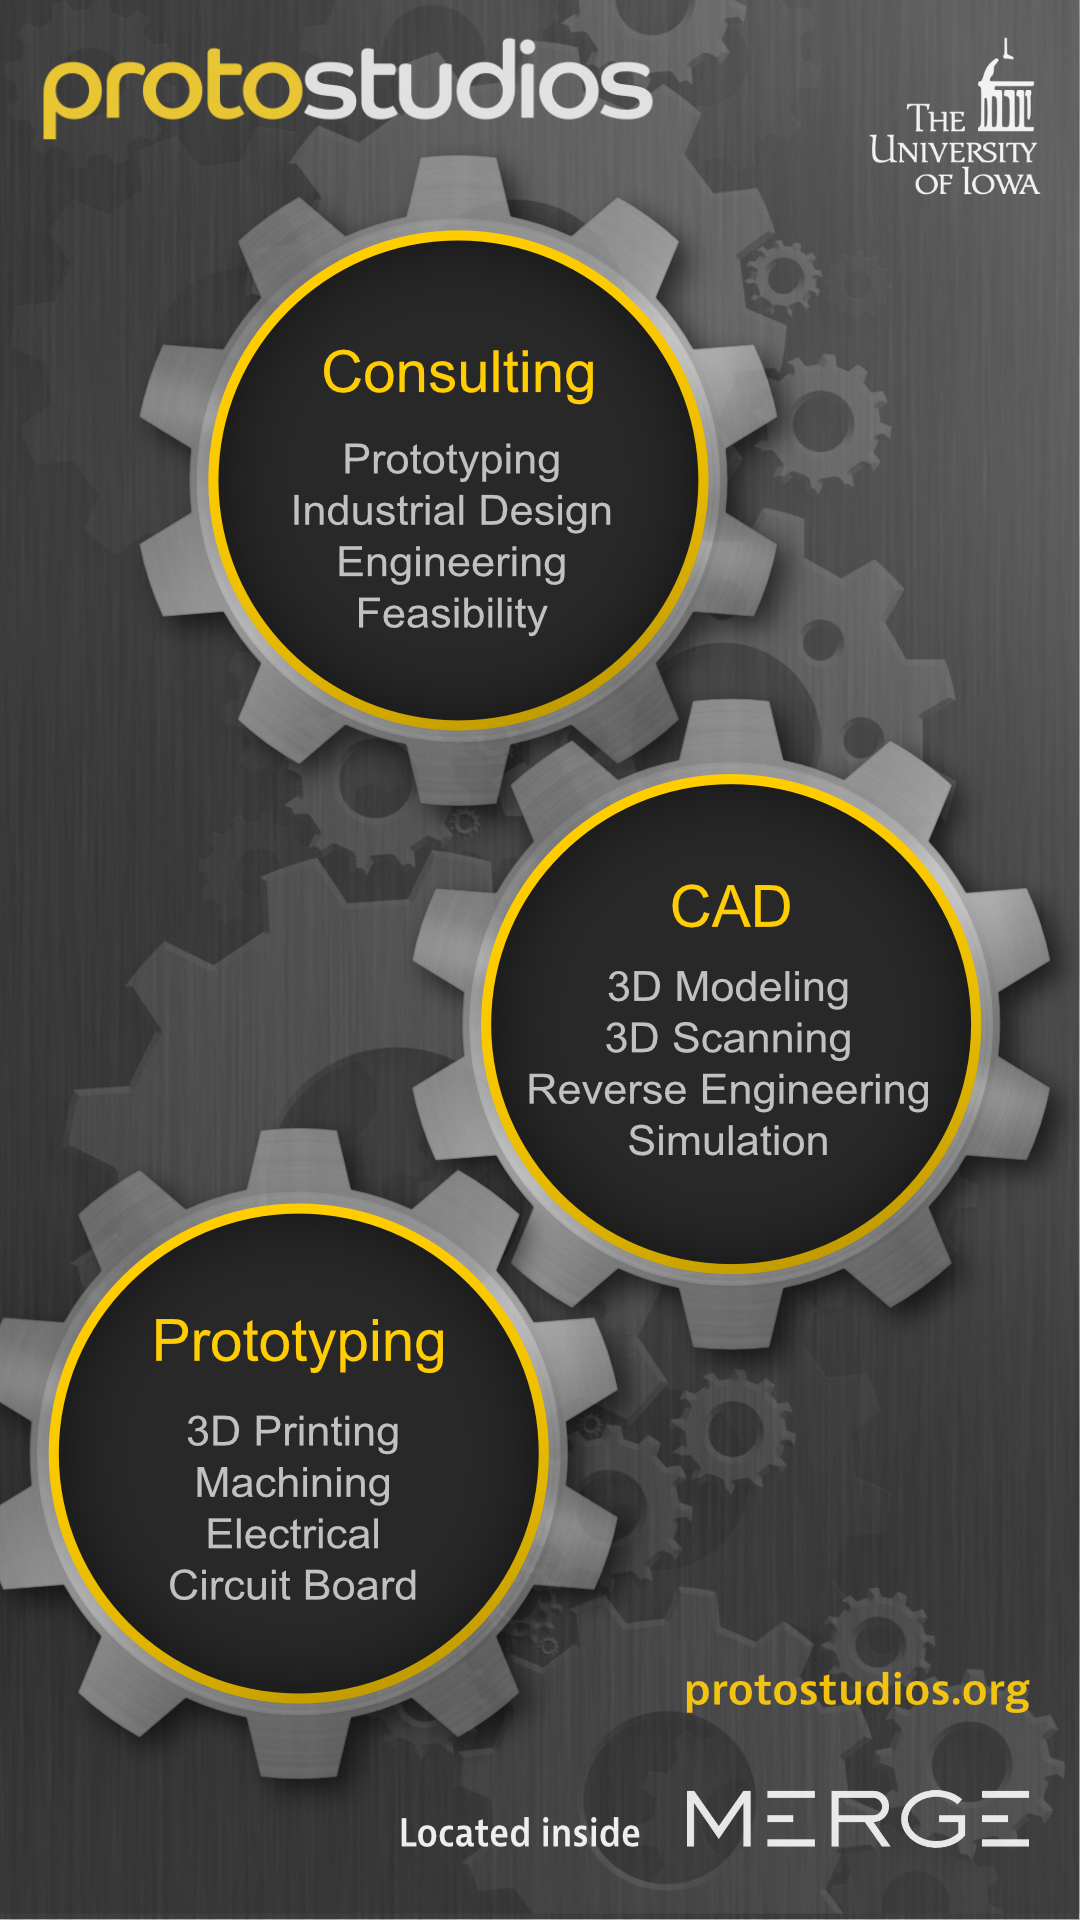 Protostudios; Consulting, CAD and Prototyping Services